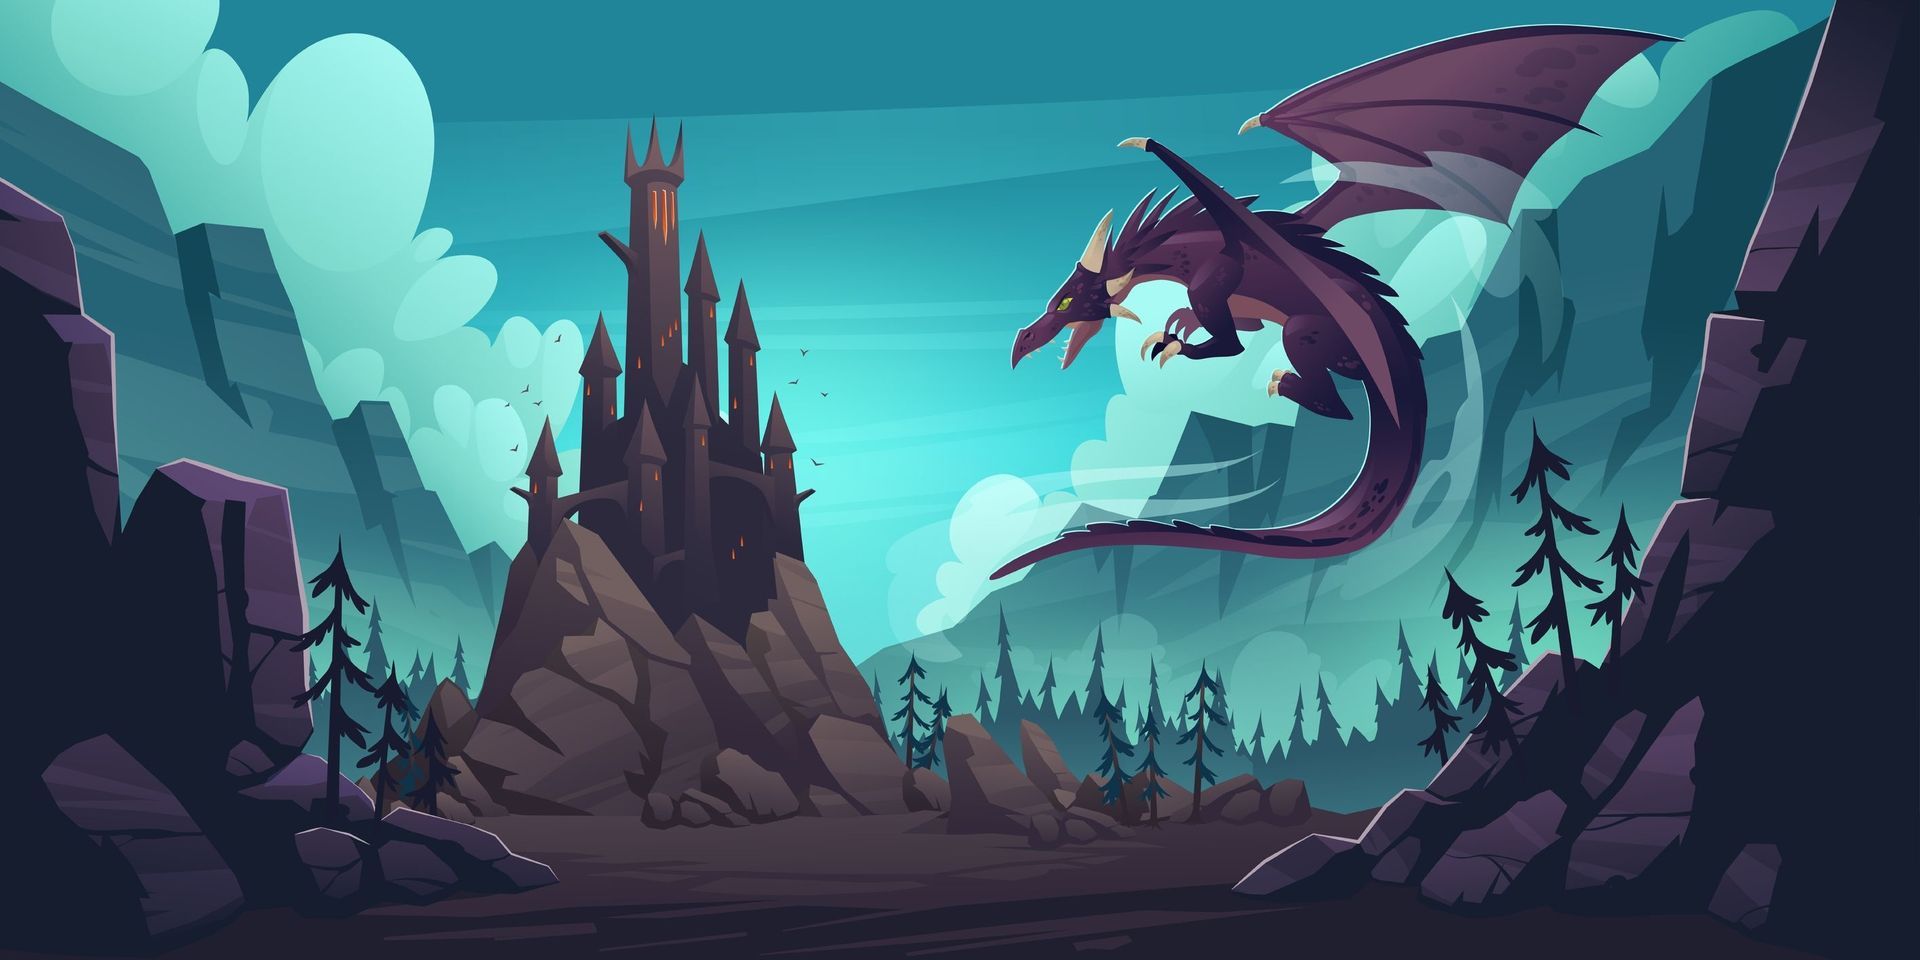 Story illustration of a red dragon flying above a make-believe castle